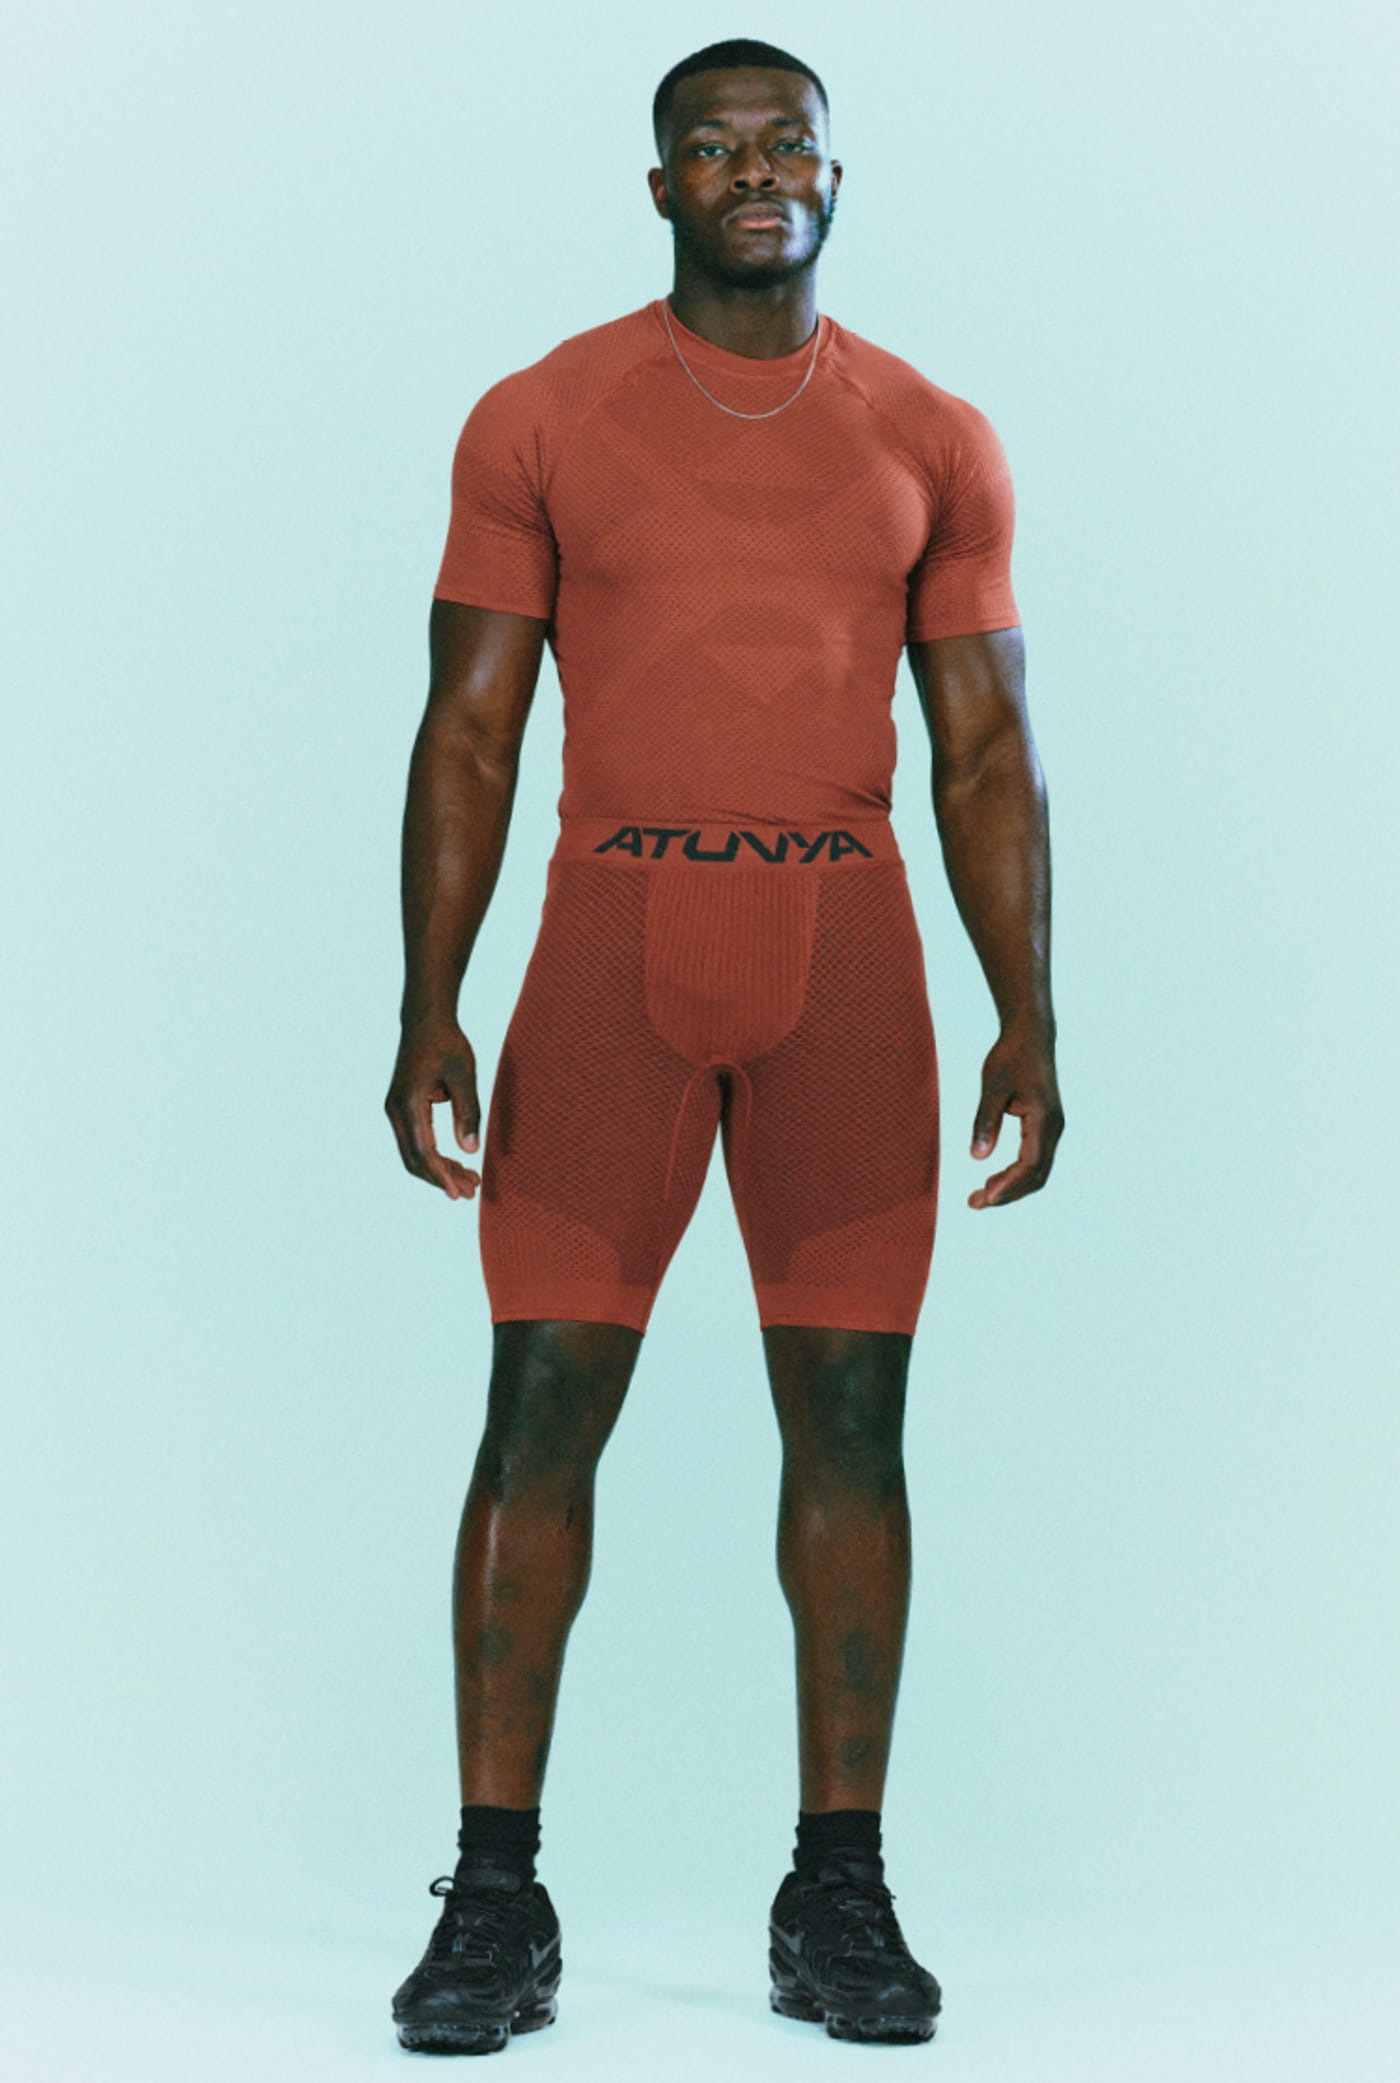 KINETIC Compression Shorts